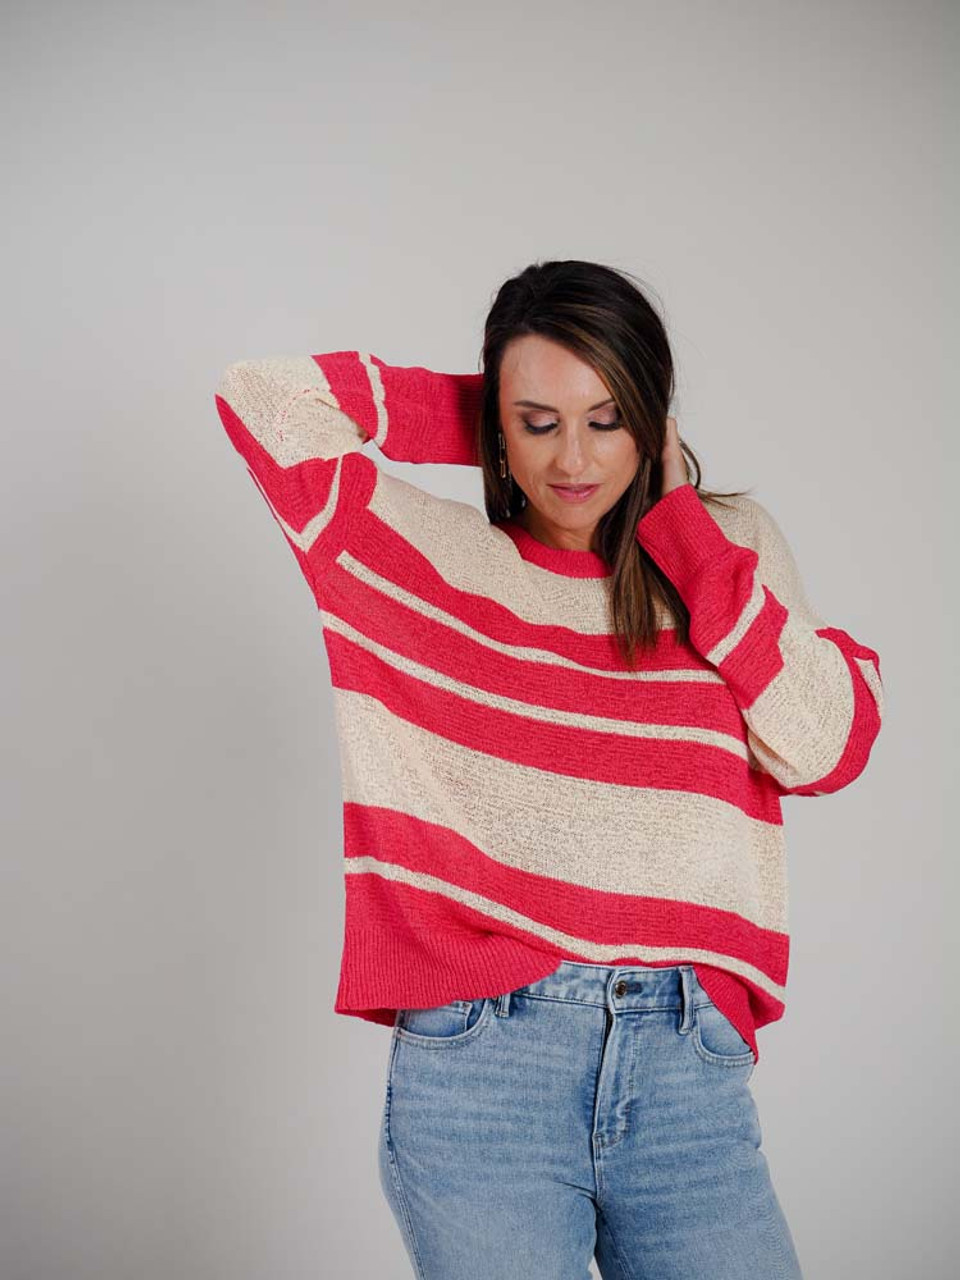 Light weight loose knit natural beige colored sweater with bright pink stripes. Bright pink at the wide round neck, long sleeves